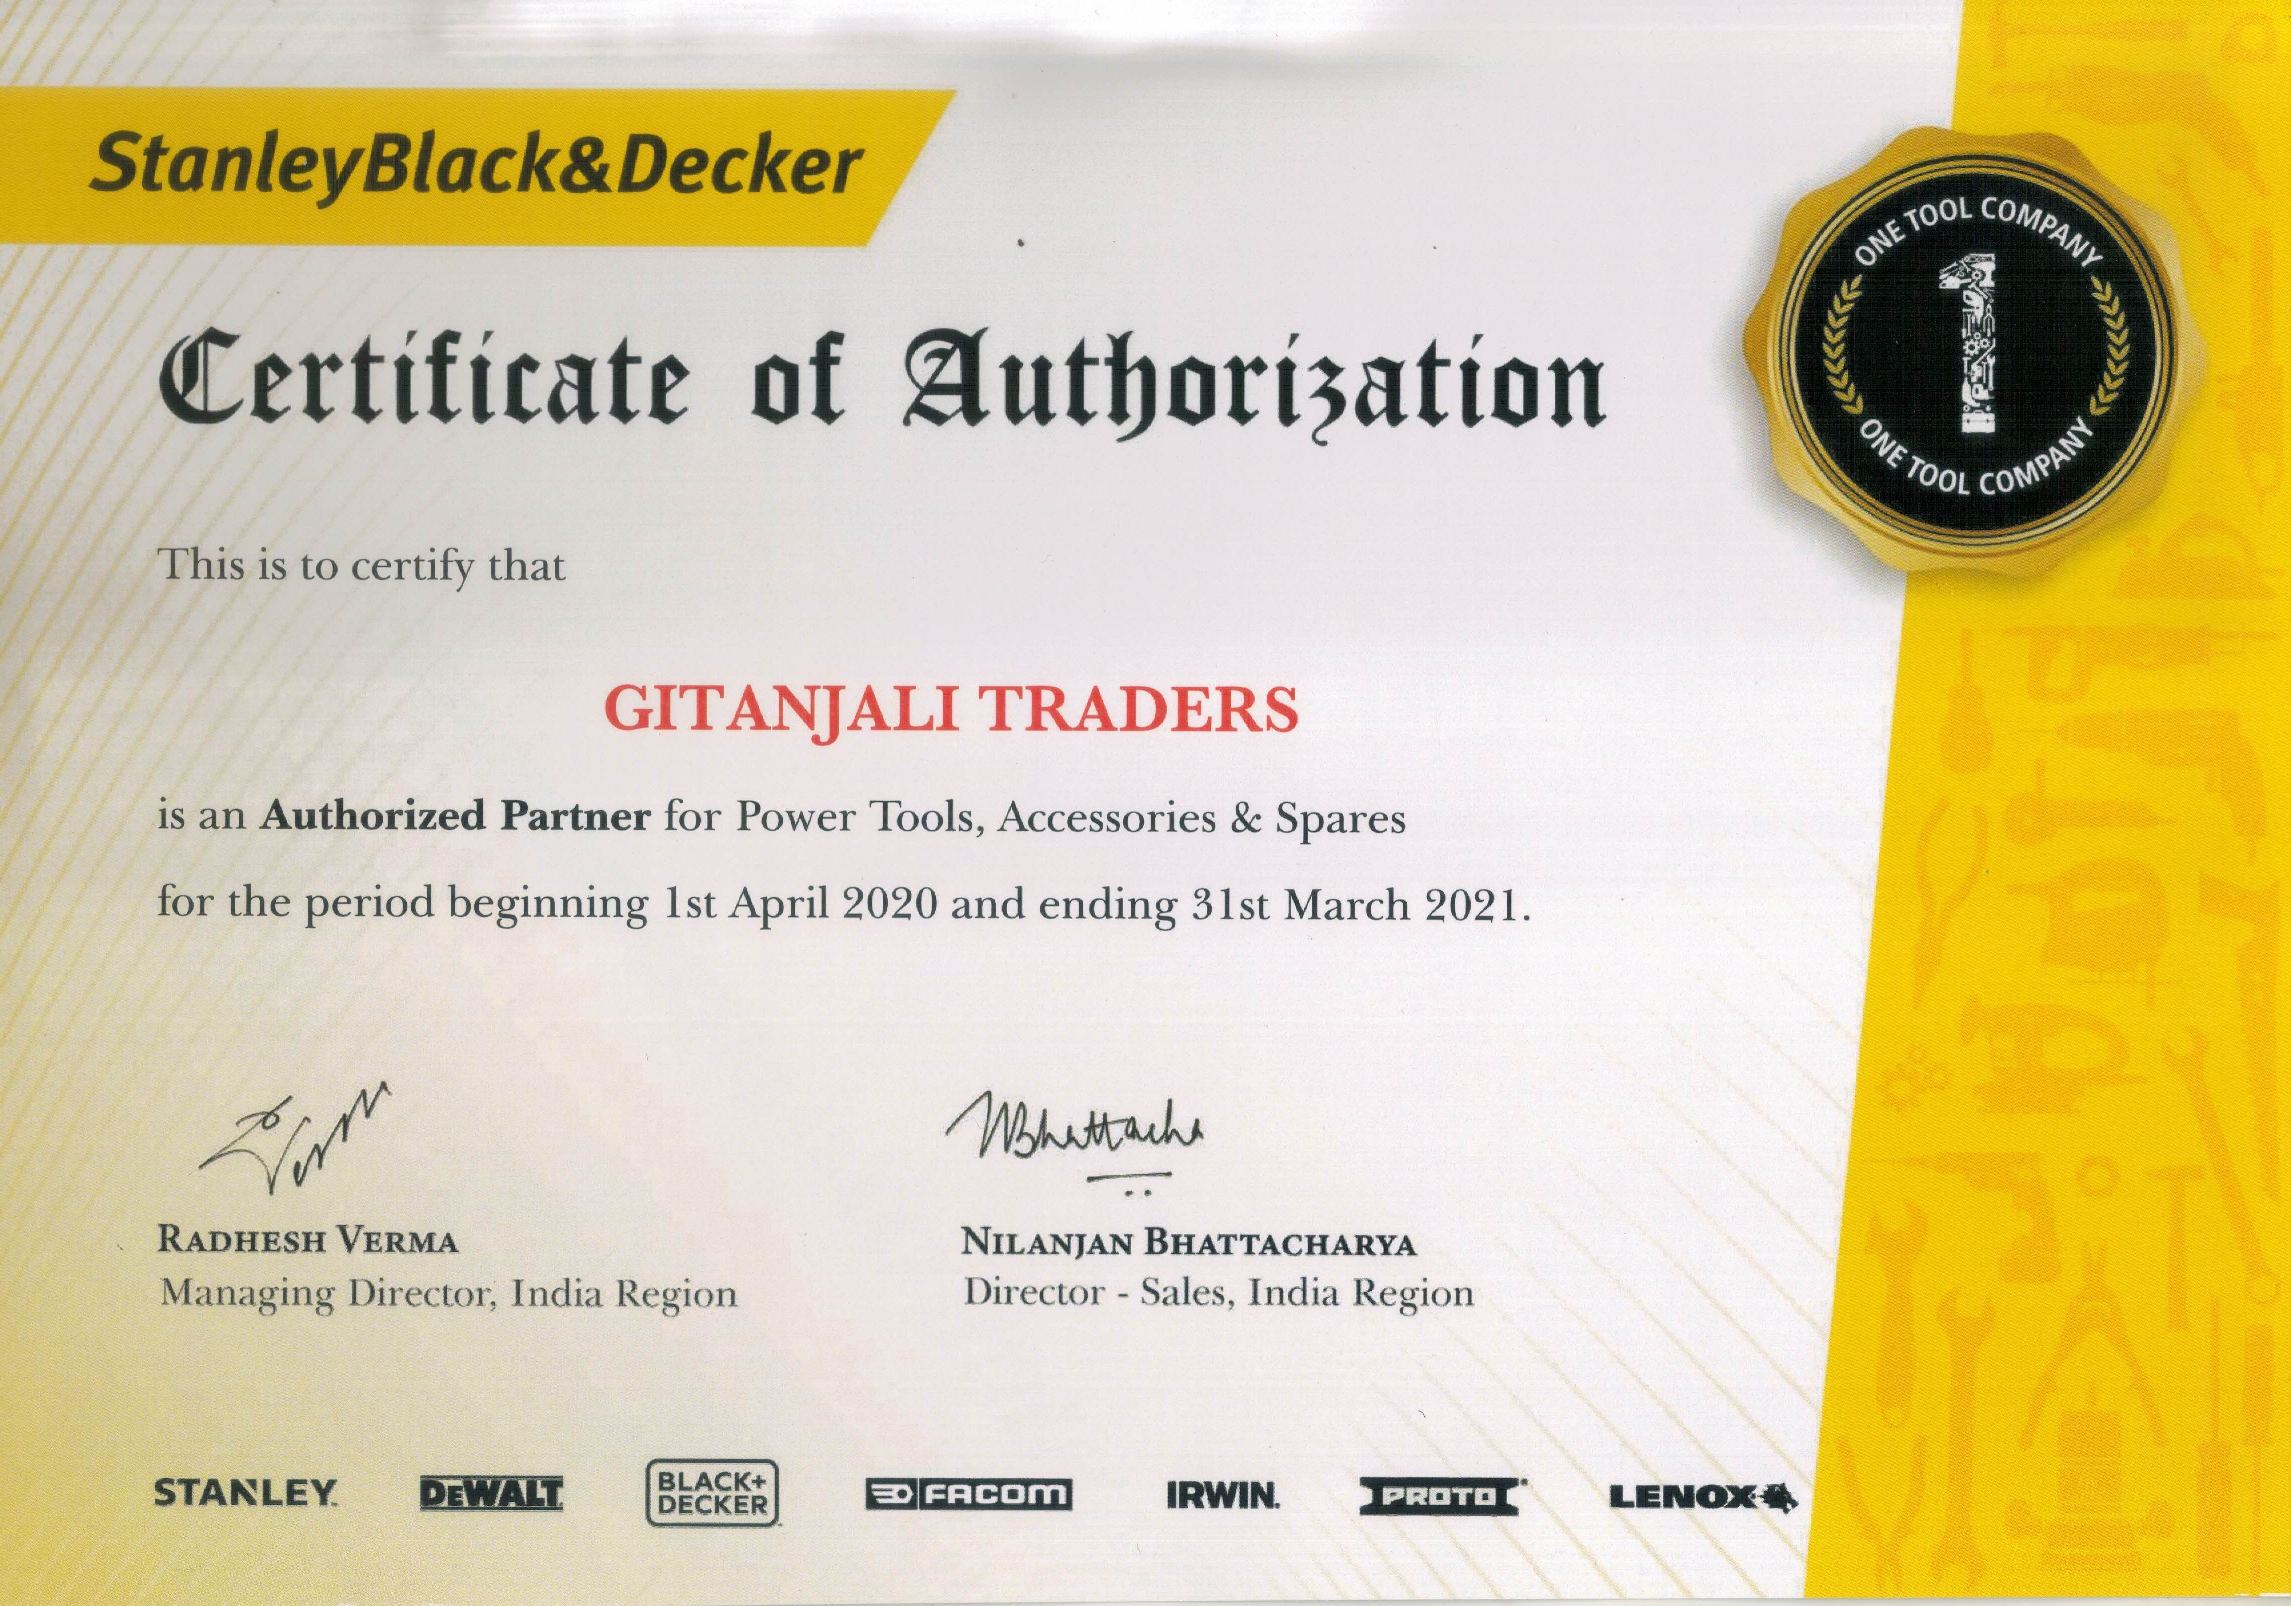 stanley black & decker of certificate stanley-black-and-decker-certificate-april-2020-to-march-2021